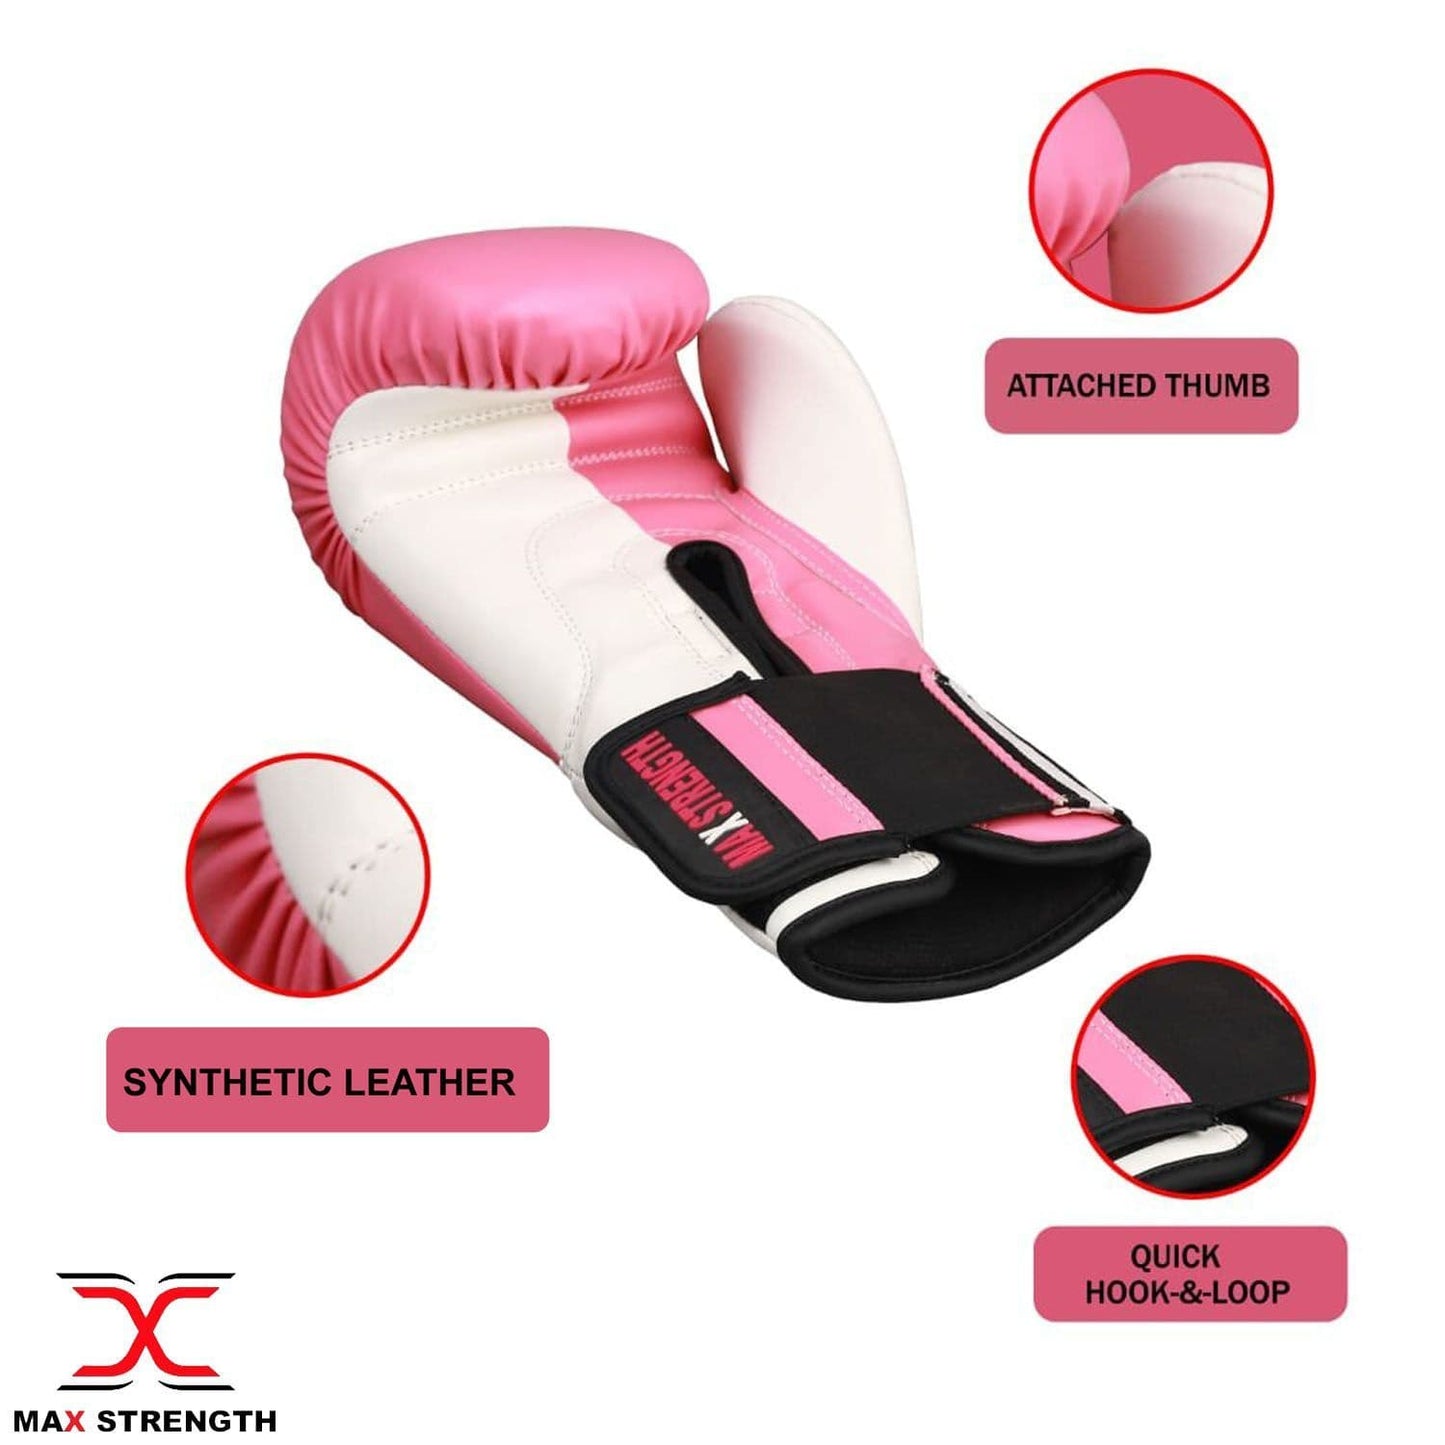 MAXSTRENGTH Boxing Gloves for Women's Pink/White